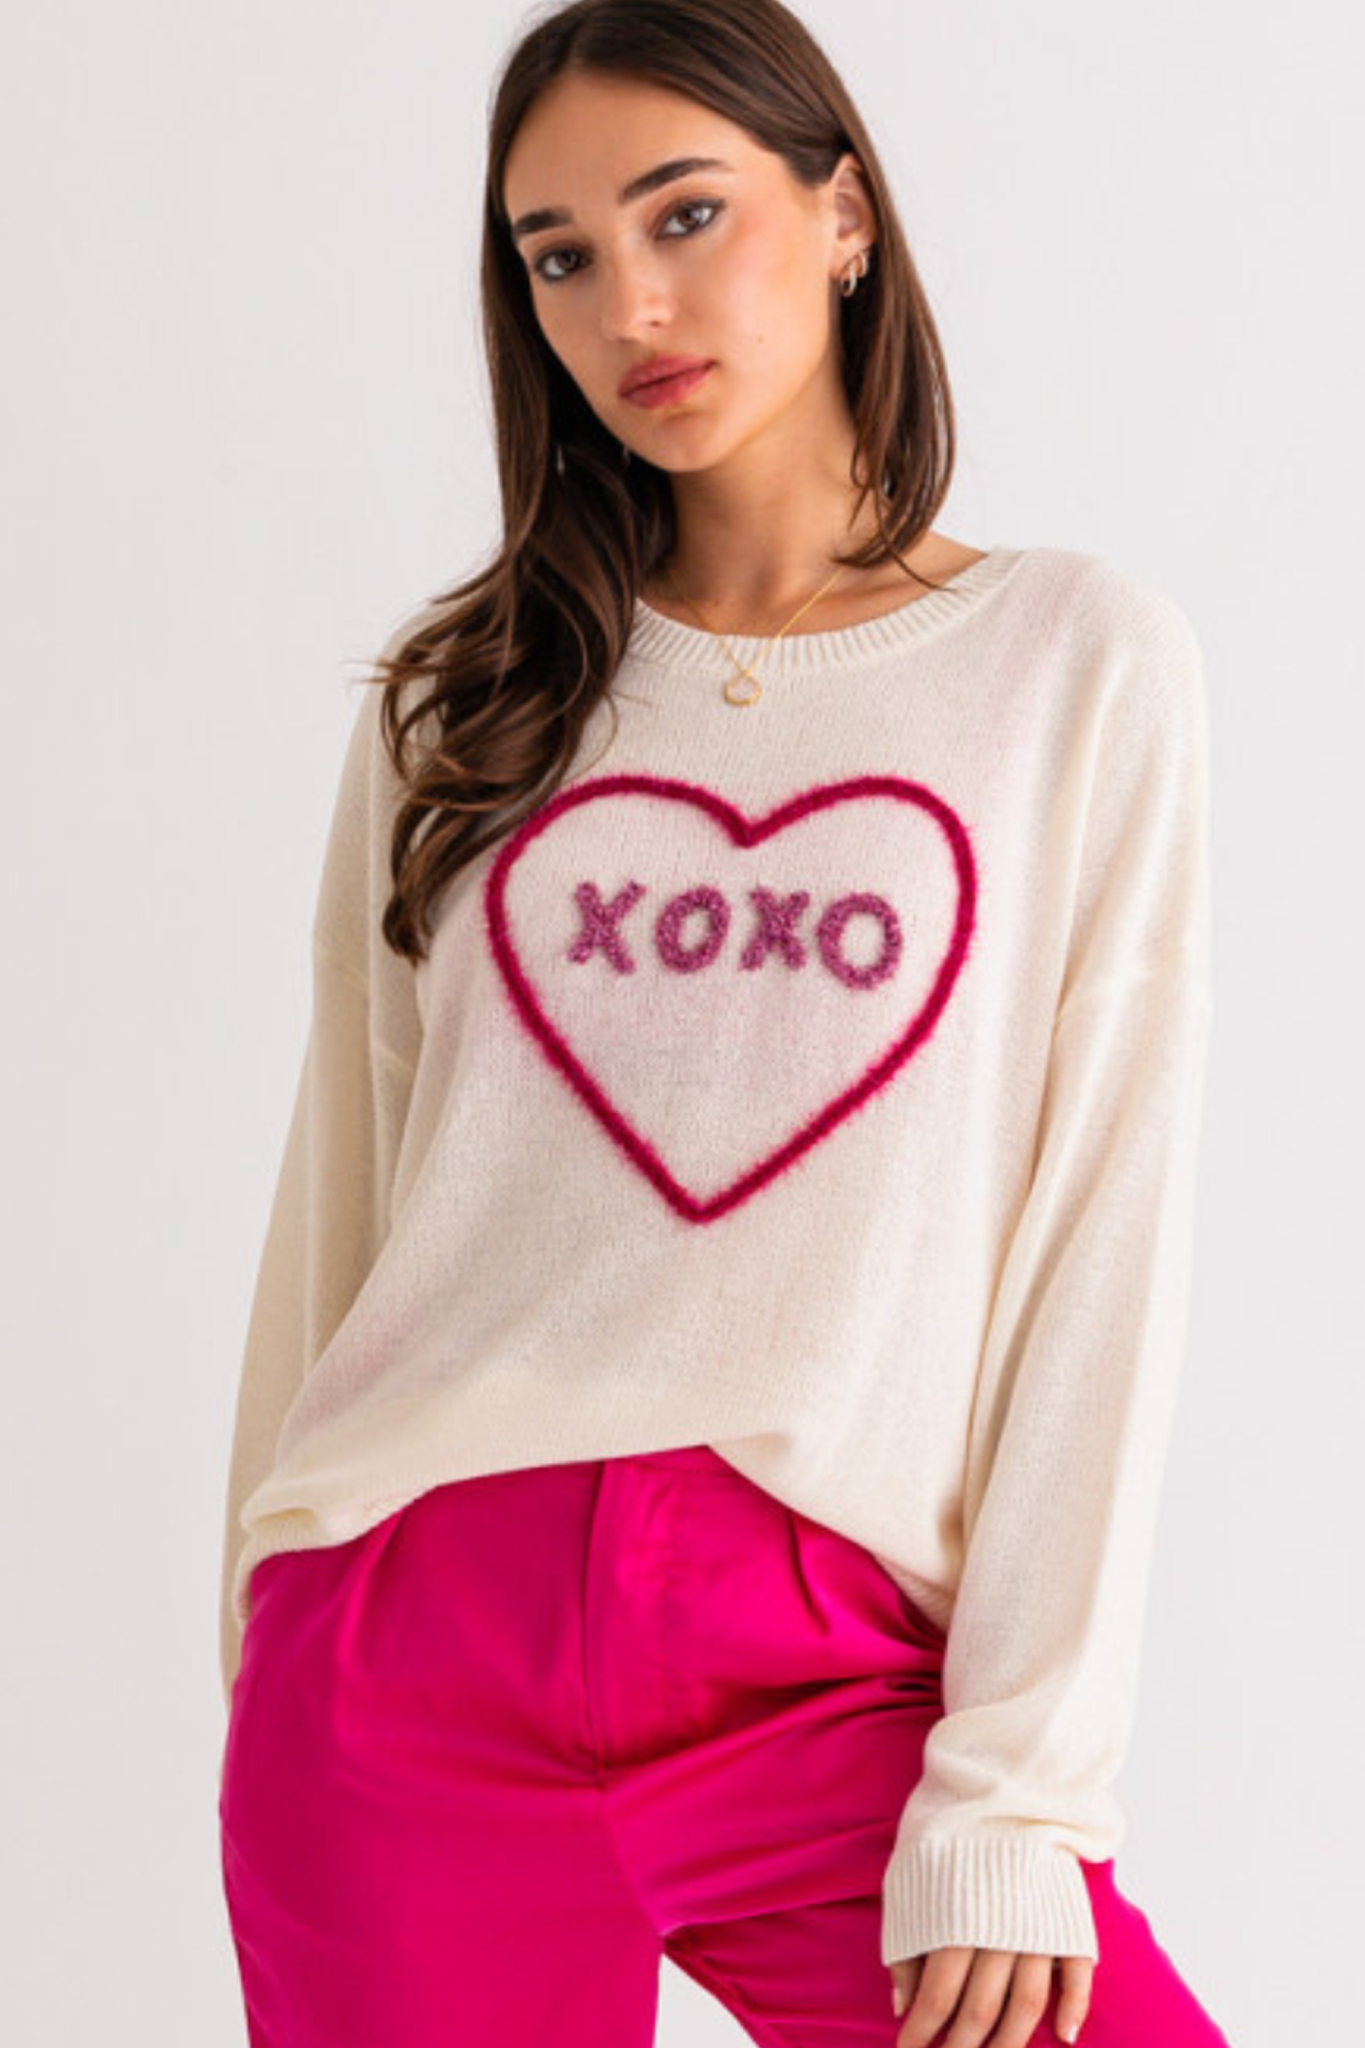 View 2 of XOXO Sweater Top, a Sweaters from Larrea Cove. Detail: .